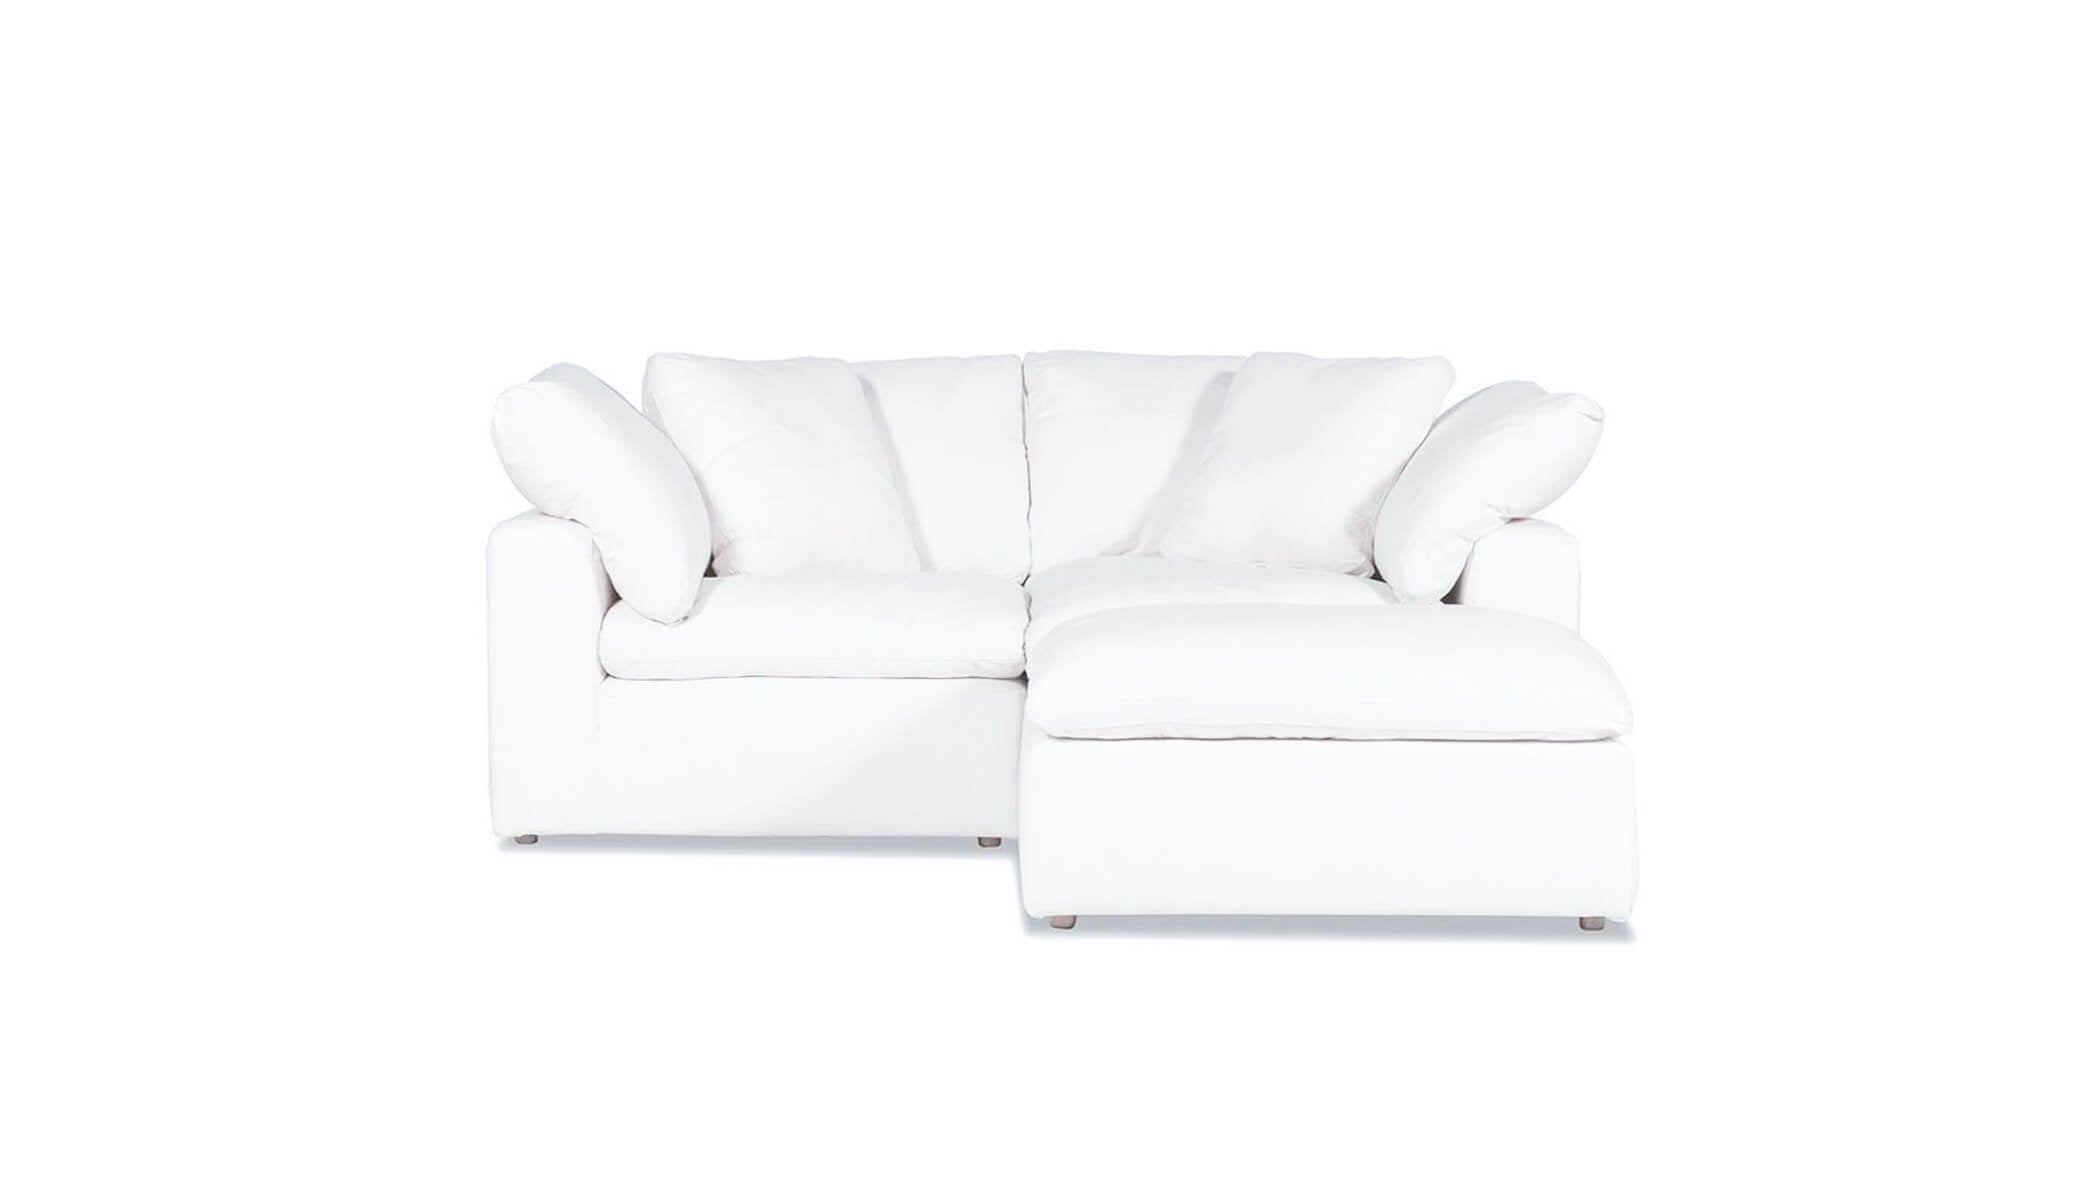 Movie Night™ 3-Piece Modular Sectional, Large, Brie - Image 1